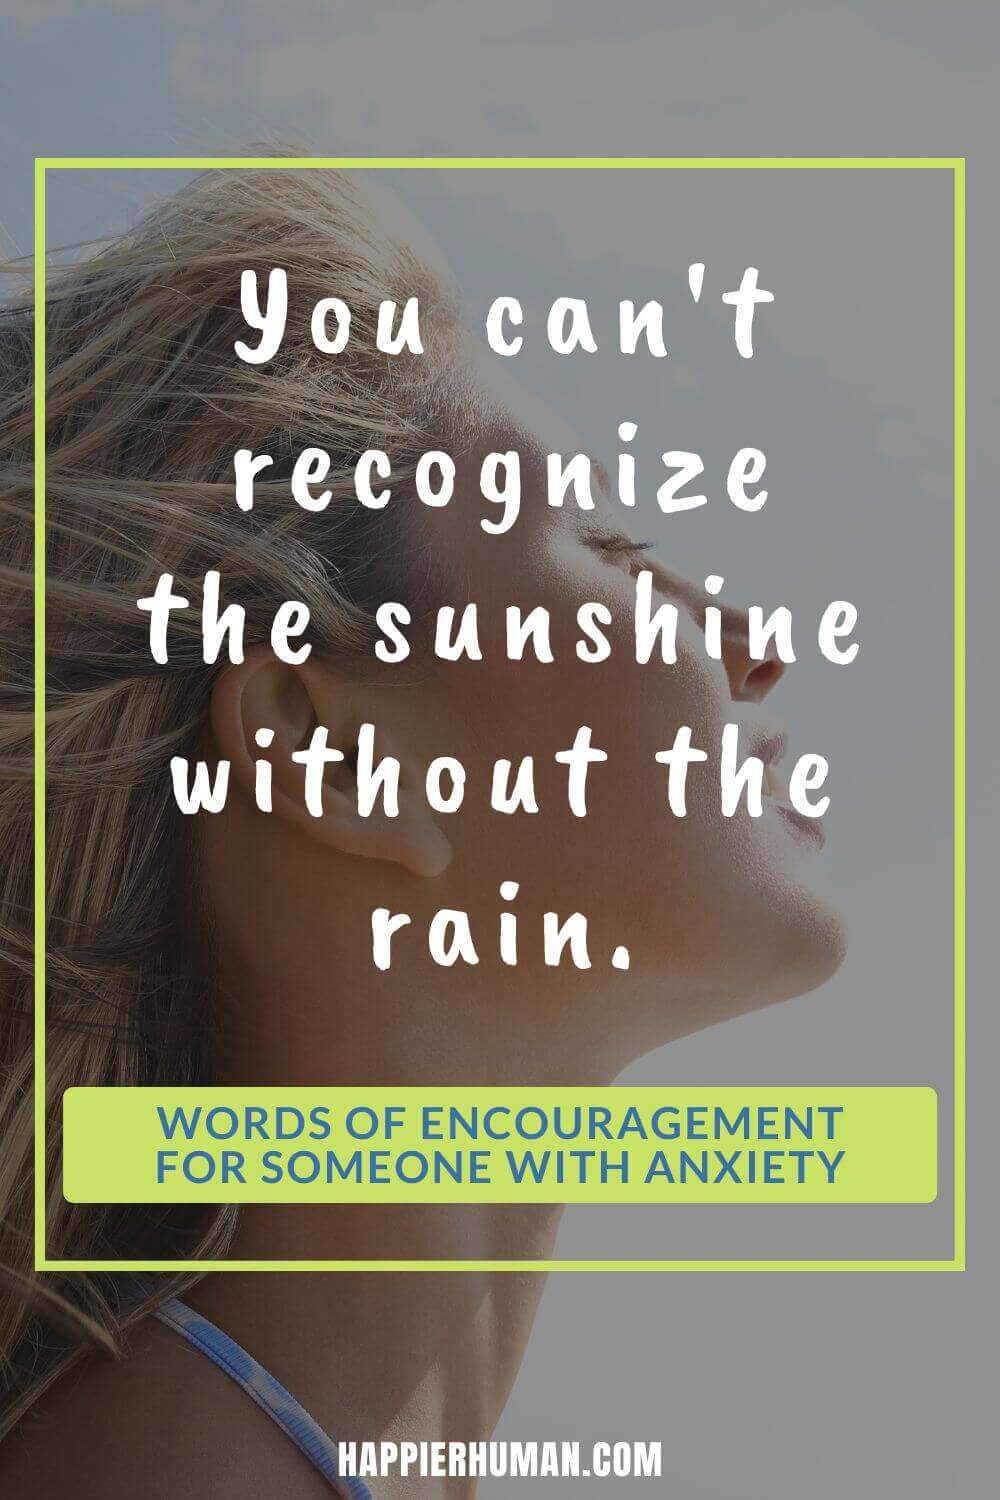 Words of Encouragement for Anxiety - You can't recognize the sunshine without the rain. | 14 positive quotes for anxiety | quotes about anxiety and depression | anxiety captions for instagram